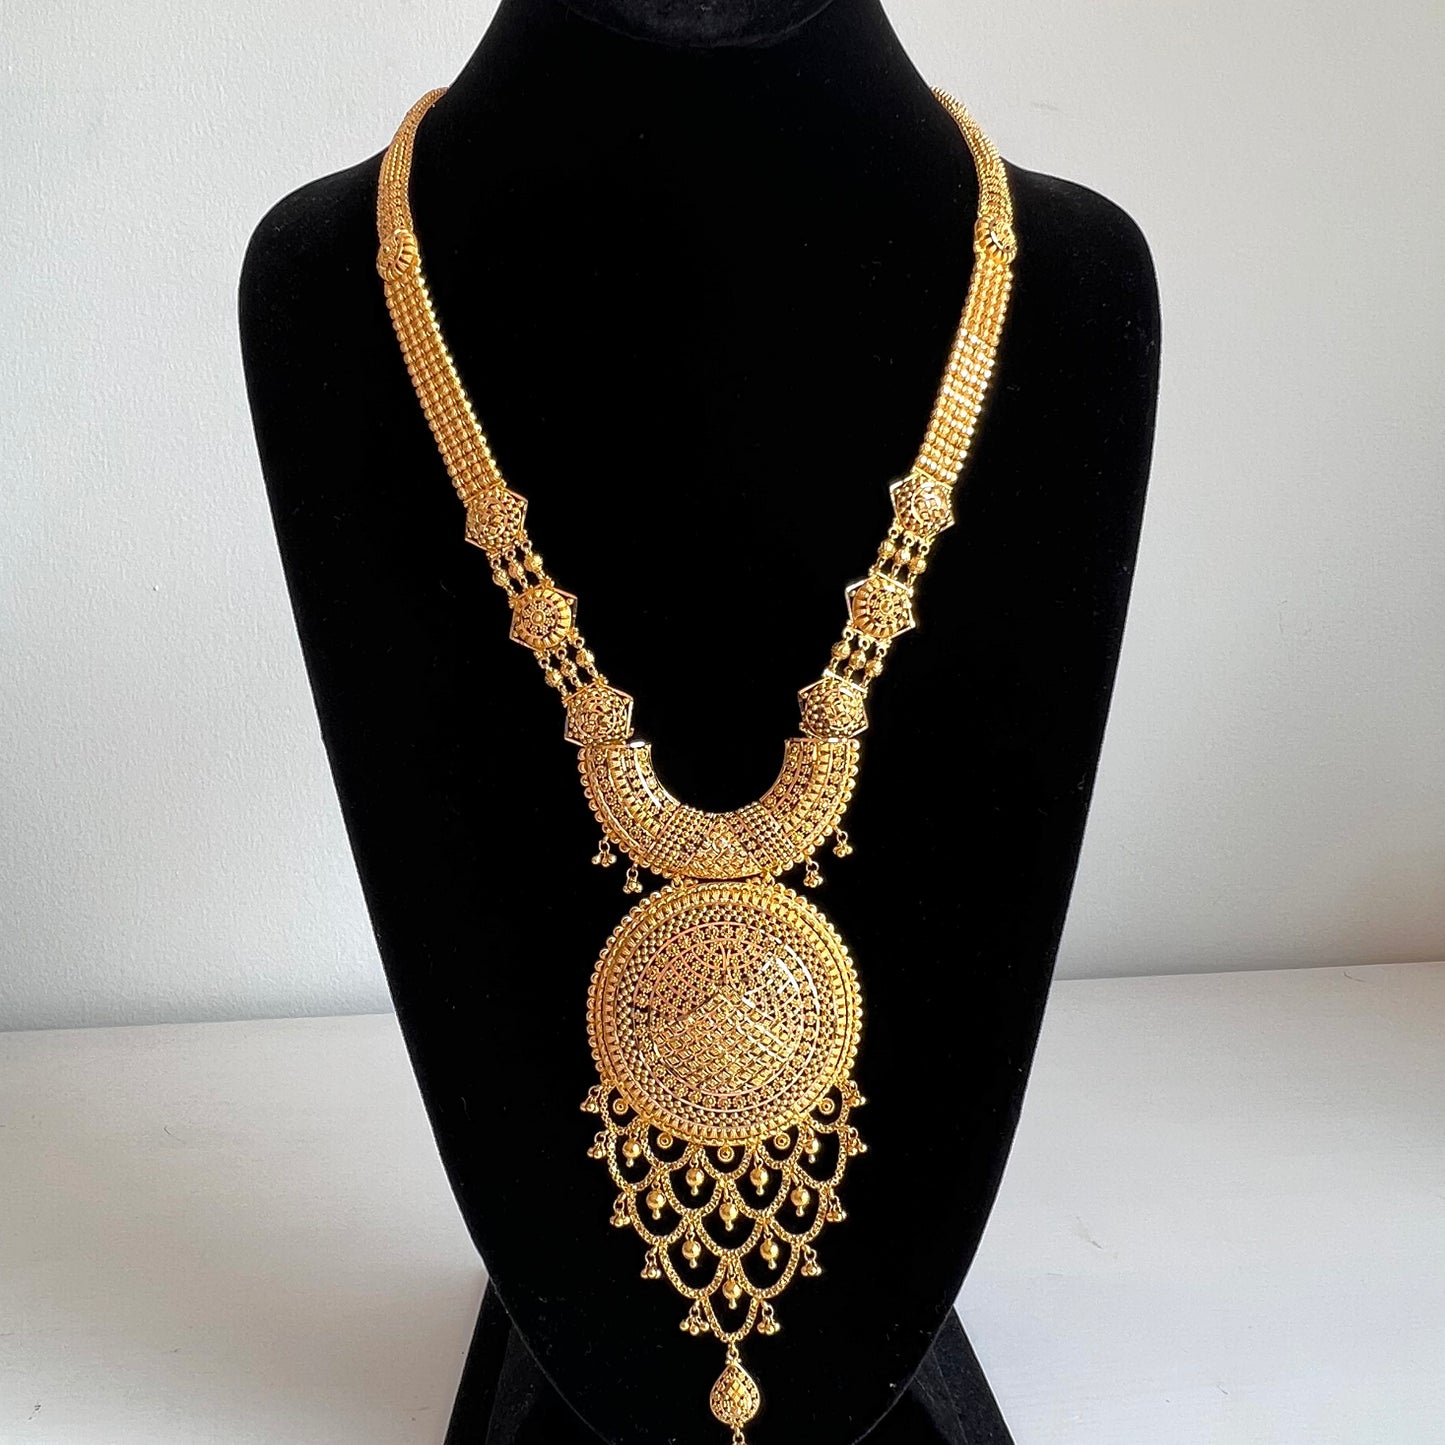 Luxurious Bridal Necklace Set with Thick Circular Center Piece and Fine Earrings